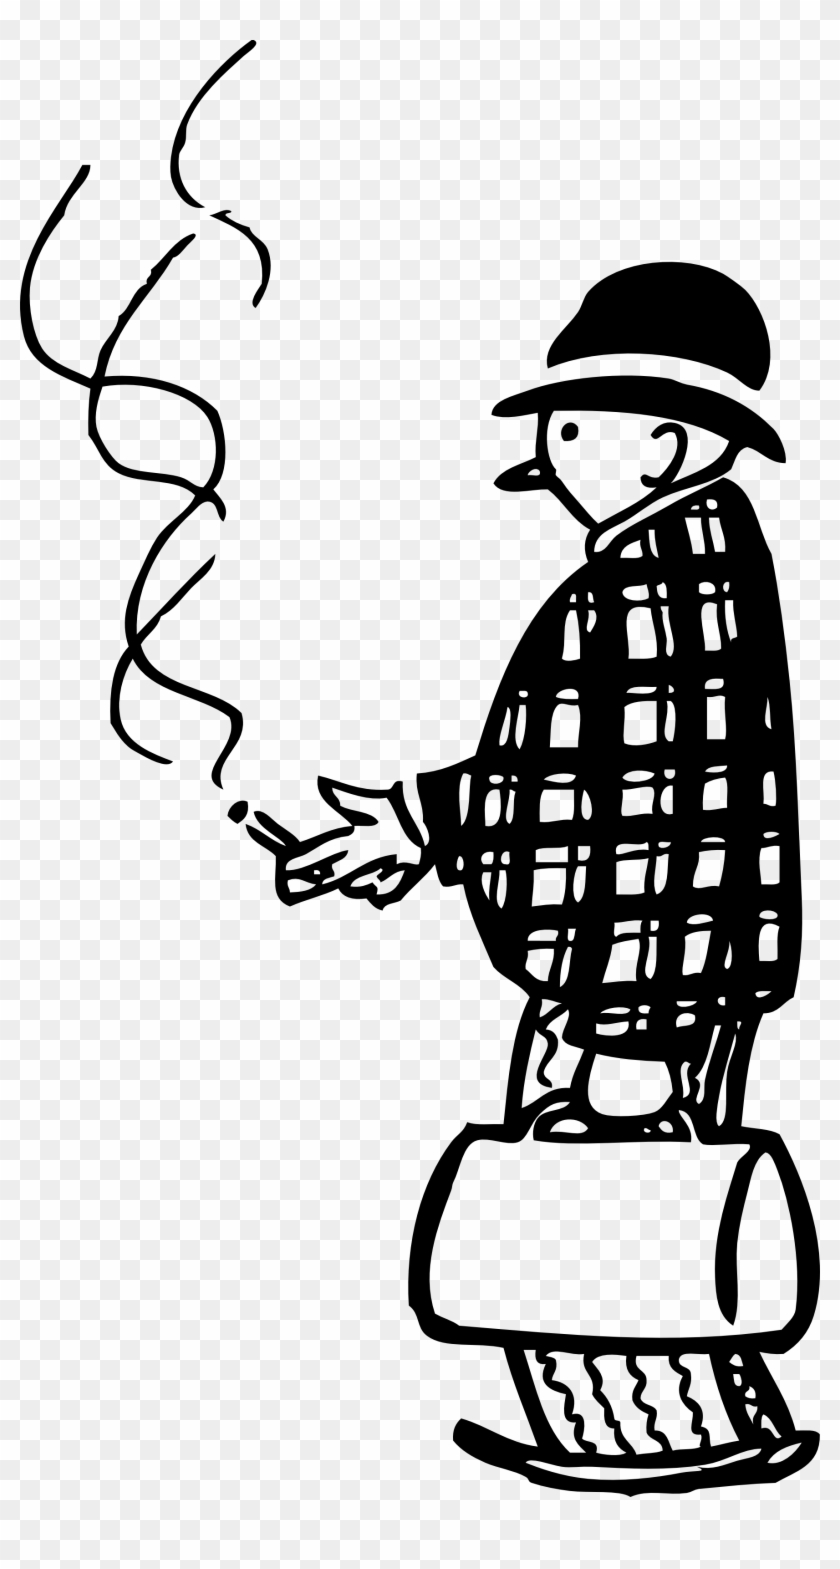 Free Retro Clipart Of A Family Doctor Smoking Cigar - Black And White Cartoon Smoking Png Transparent Png #527824